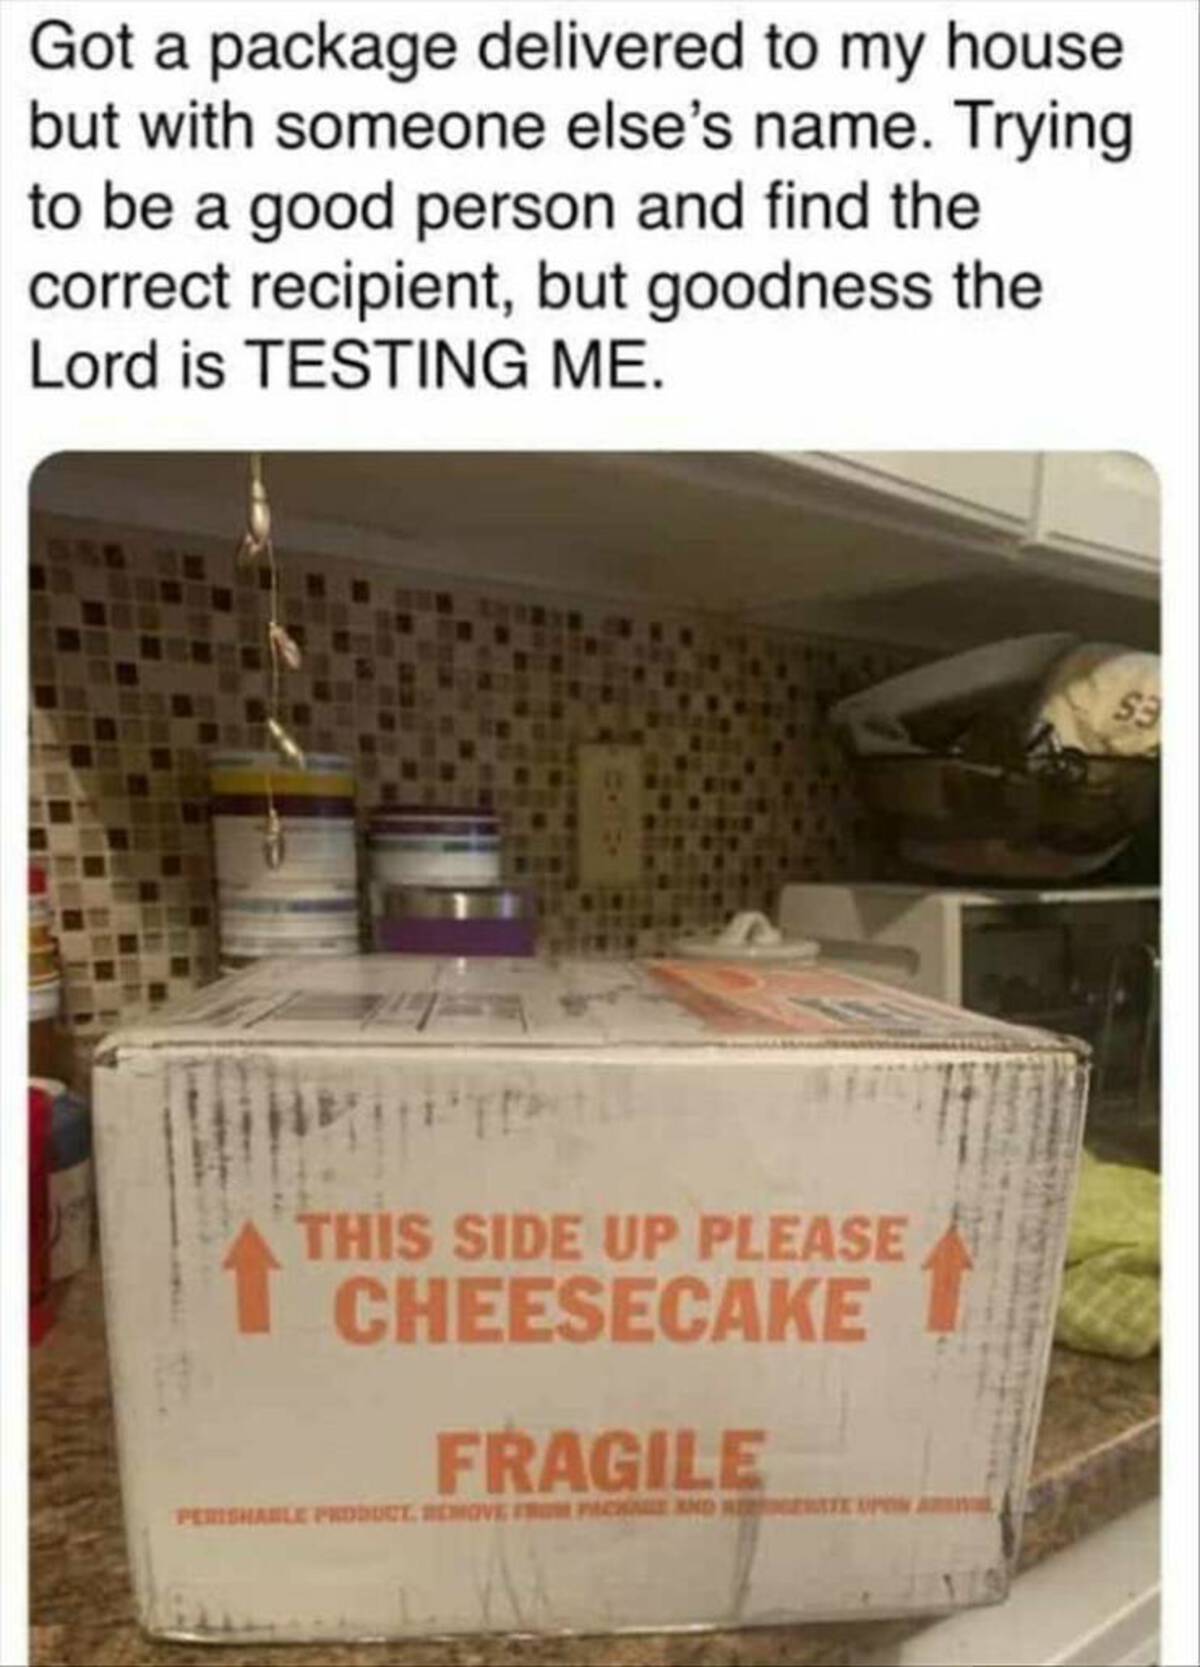 signage - Got a package delivered to my house but with someone else's name. Trying to be a good person and find the correct recipient, but goodness the Lord is Testing Me. This Side Up Please Cheesecake Fragile Perishable Product Remove From Package And R